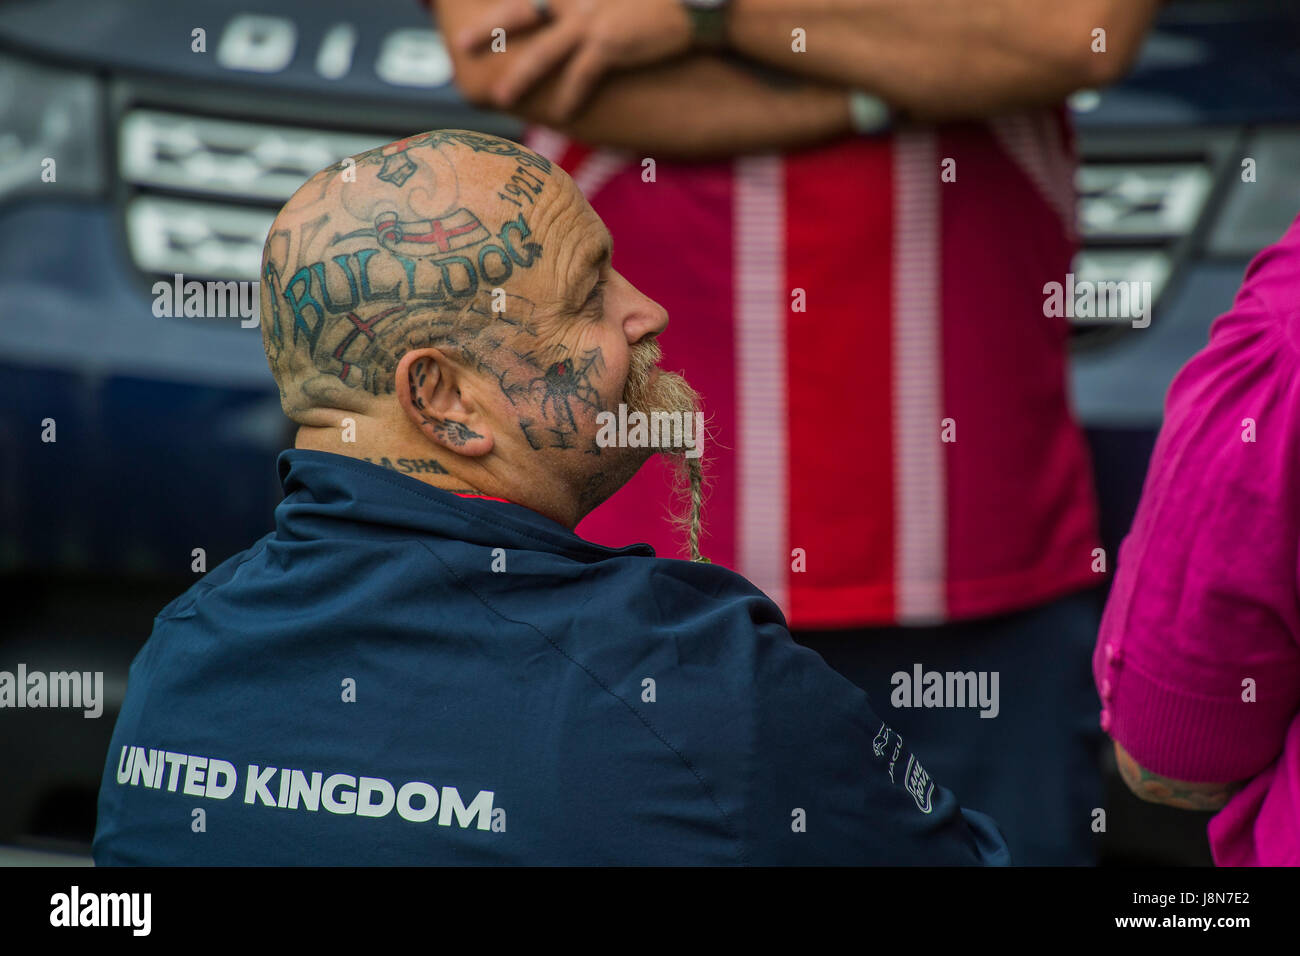 London, UK. 30th May, 2017. A tattooed team member - Prince Harry attends the launch of UK team for the Invictus Games Toronto at Tower of London. The Invictus Games was set up for injured soldiers. London 30 May 2017 Credit: Guy Bell/Alamy Live News Stock Photo